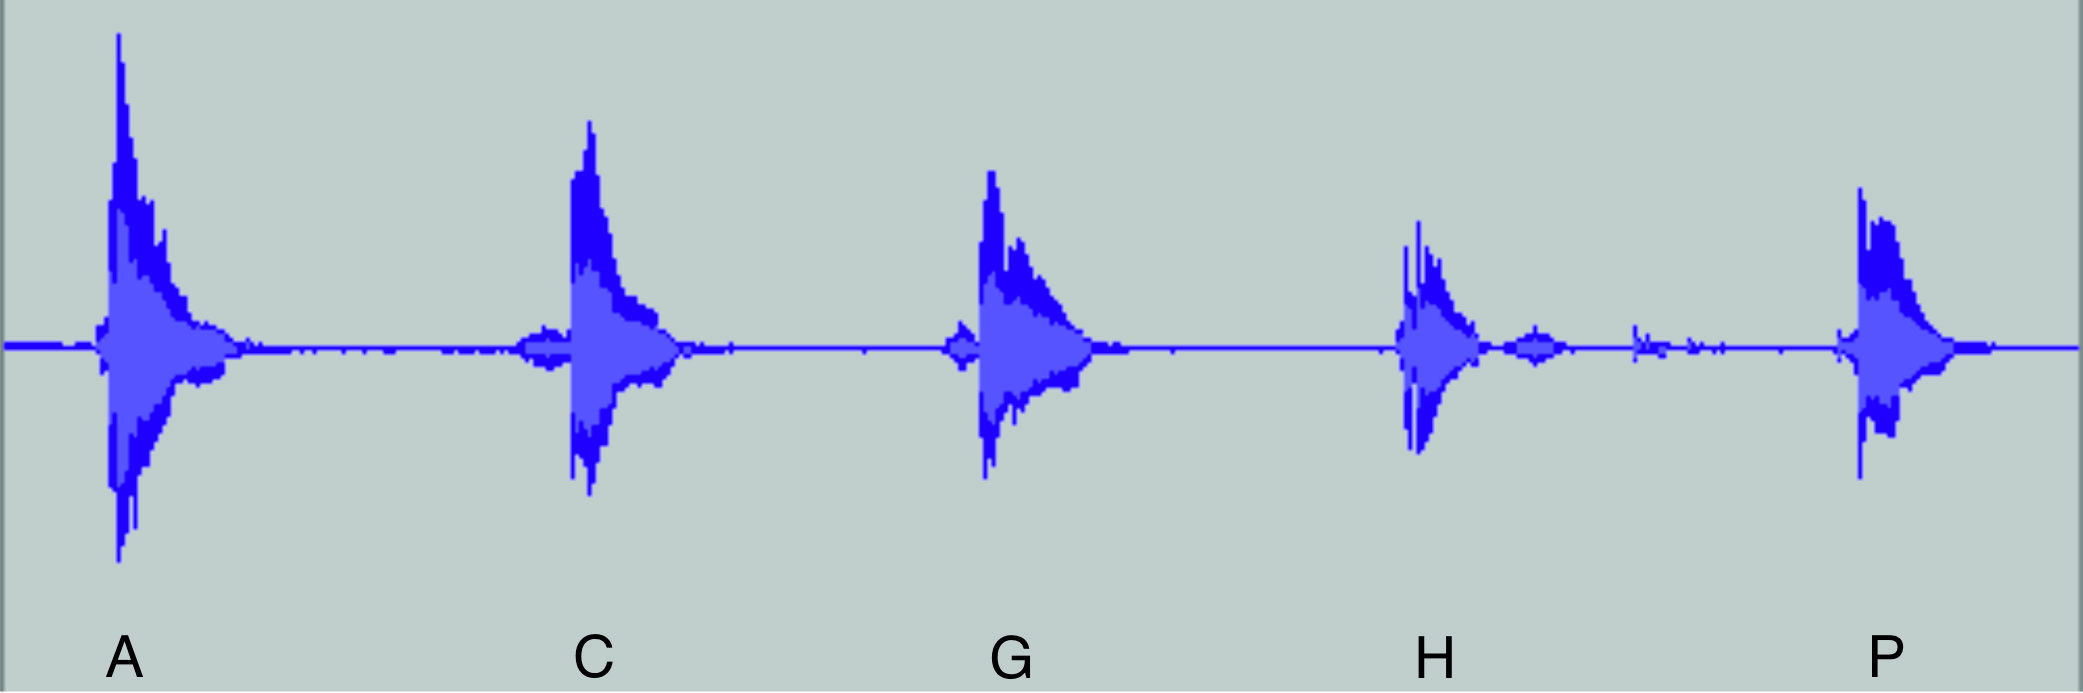 Waveforms of the letters A, C, G, H, P.